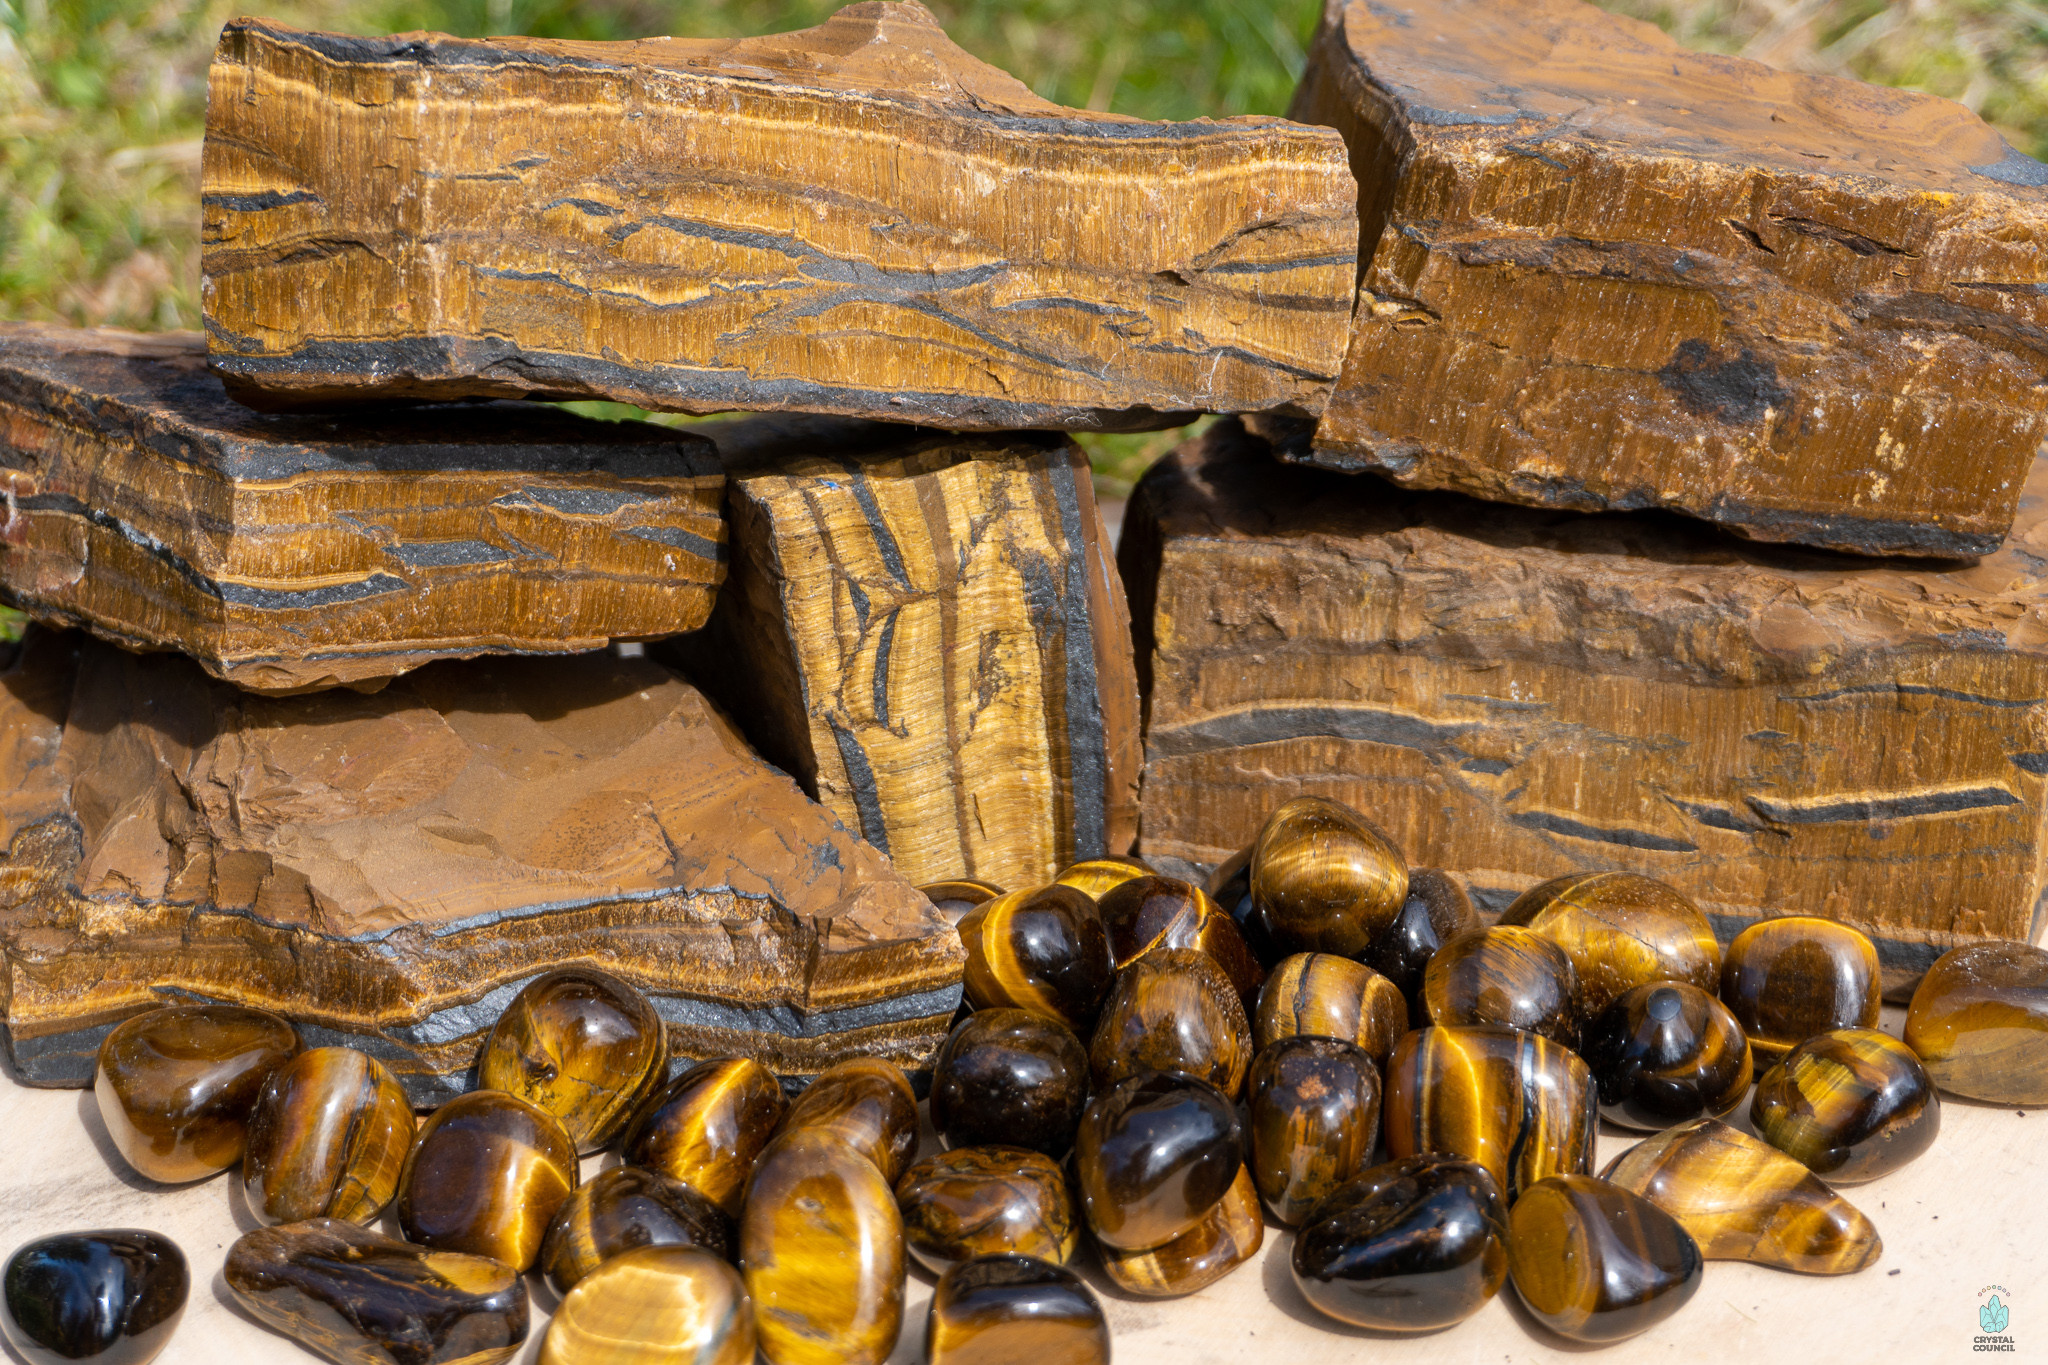 Tigers Eye Meaning: Healing Properties, Benefits, and Uses